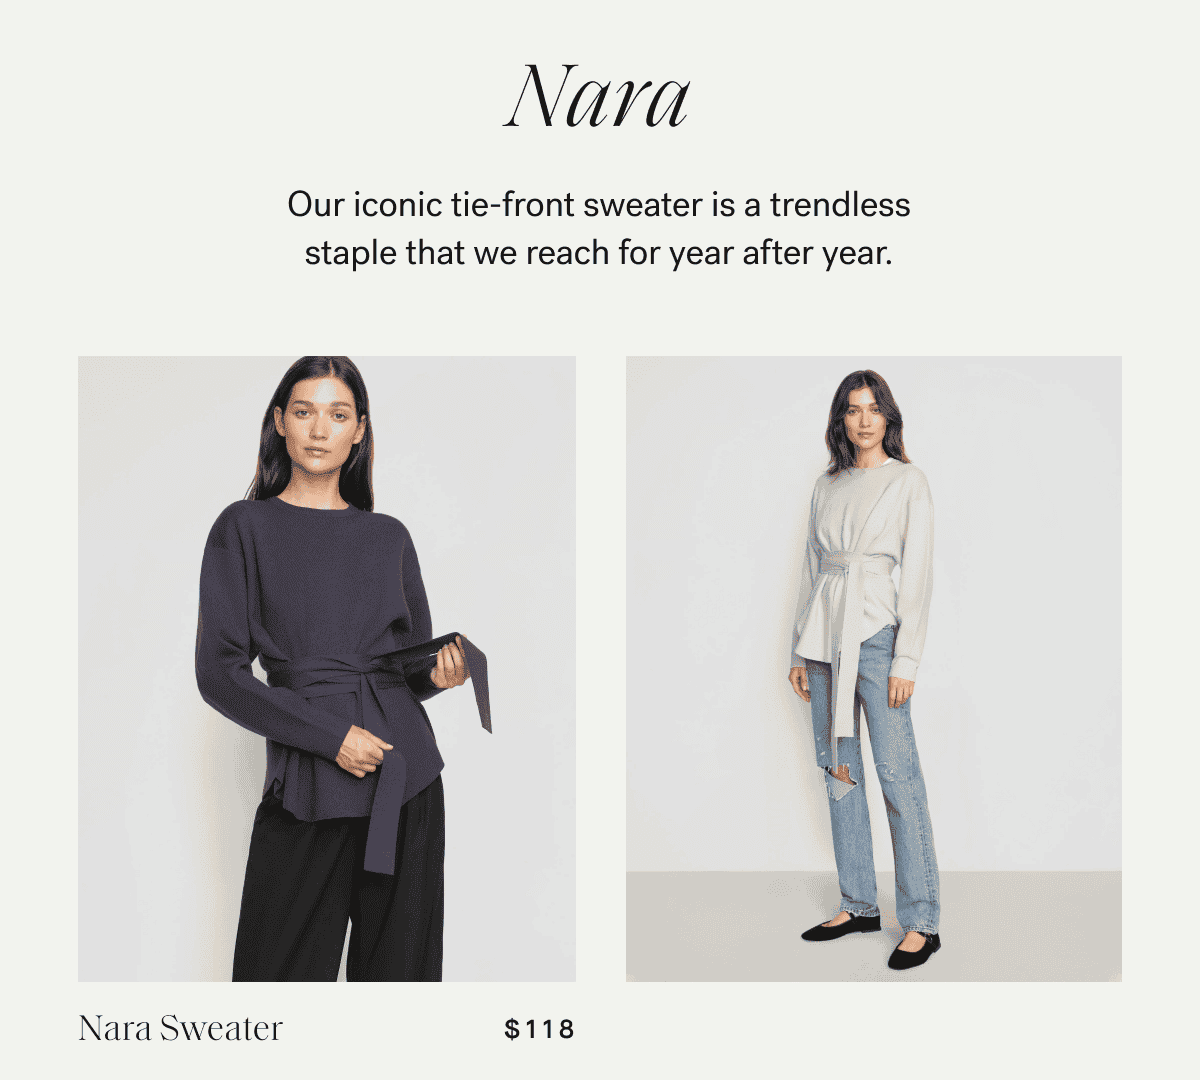 Nara — Our iconic tie-front sweater is a trendless staple that we reach for year after year.